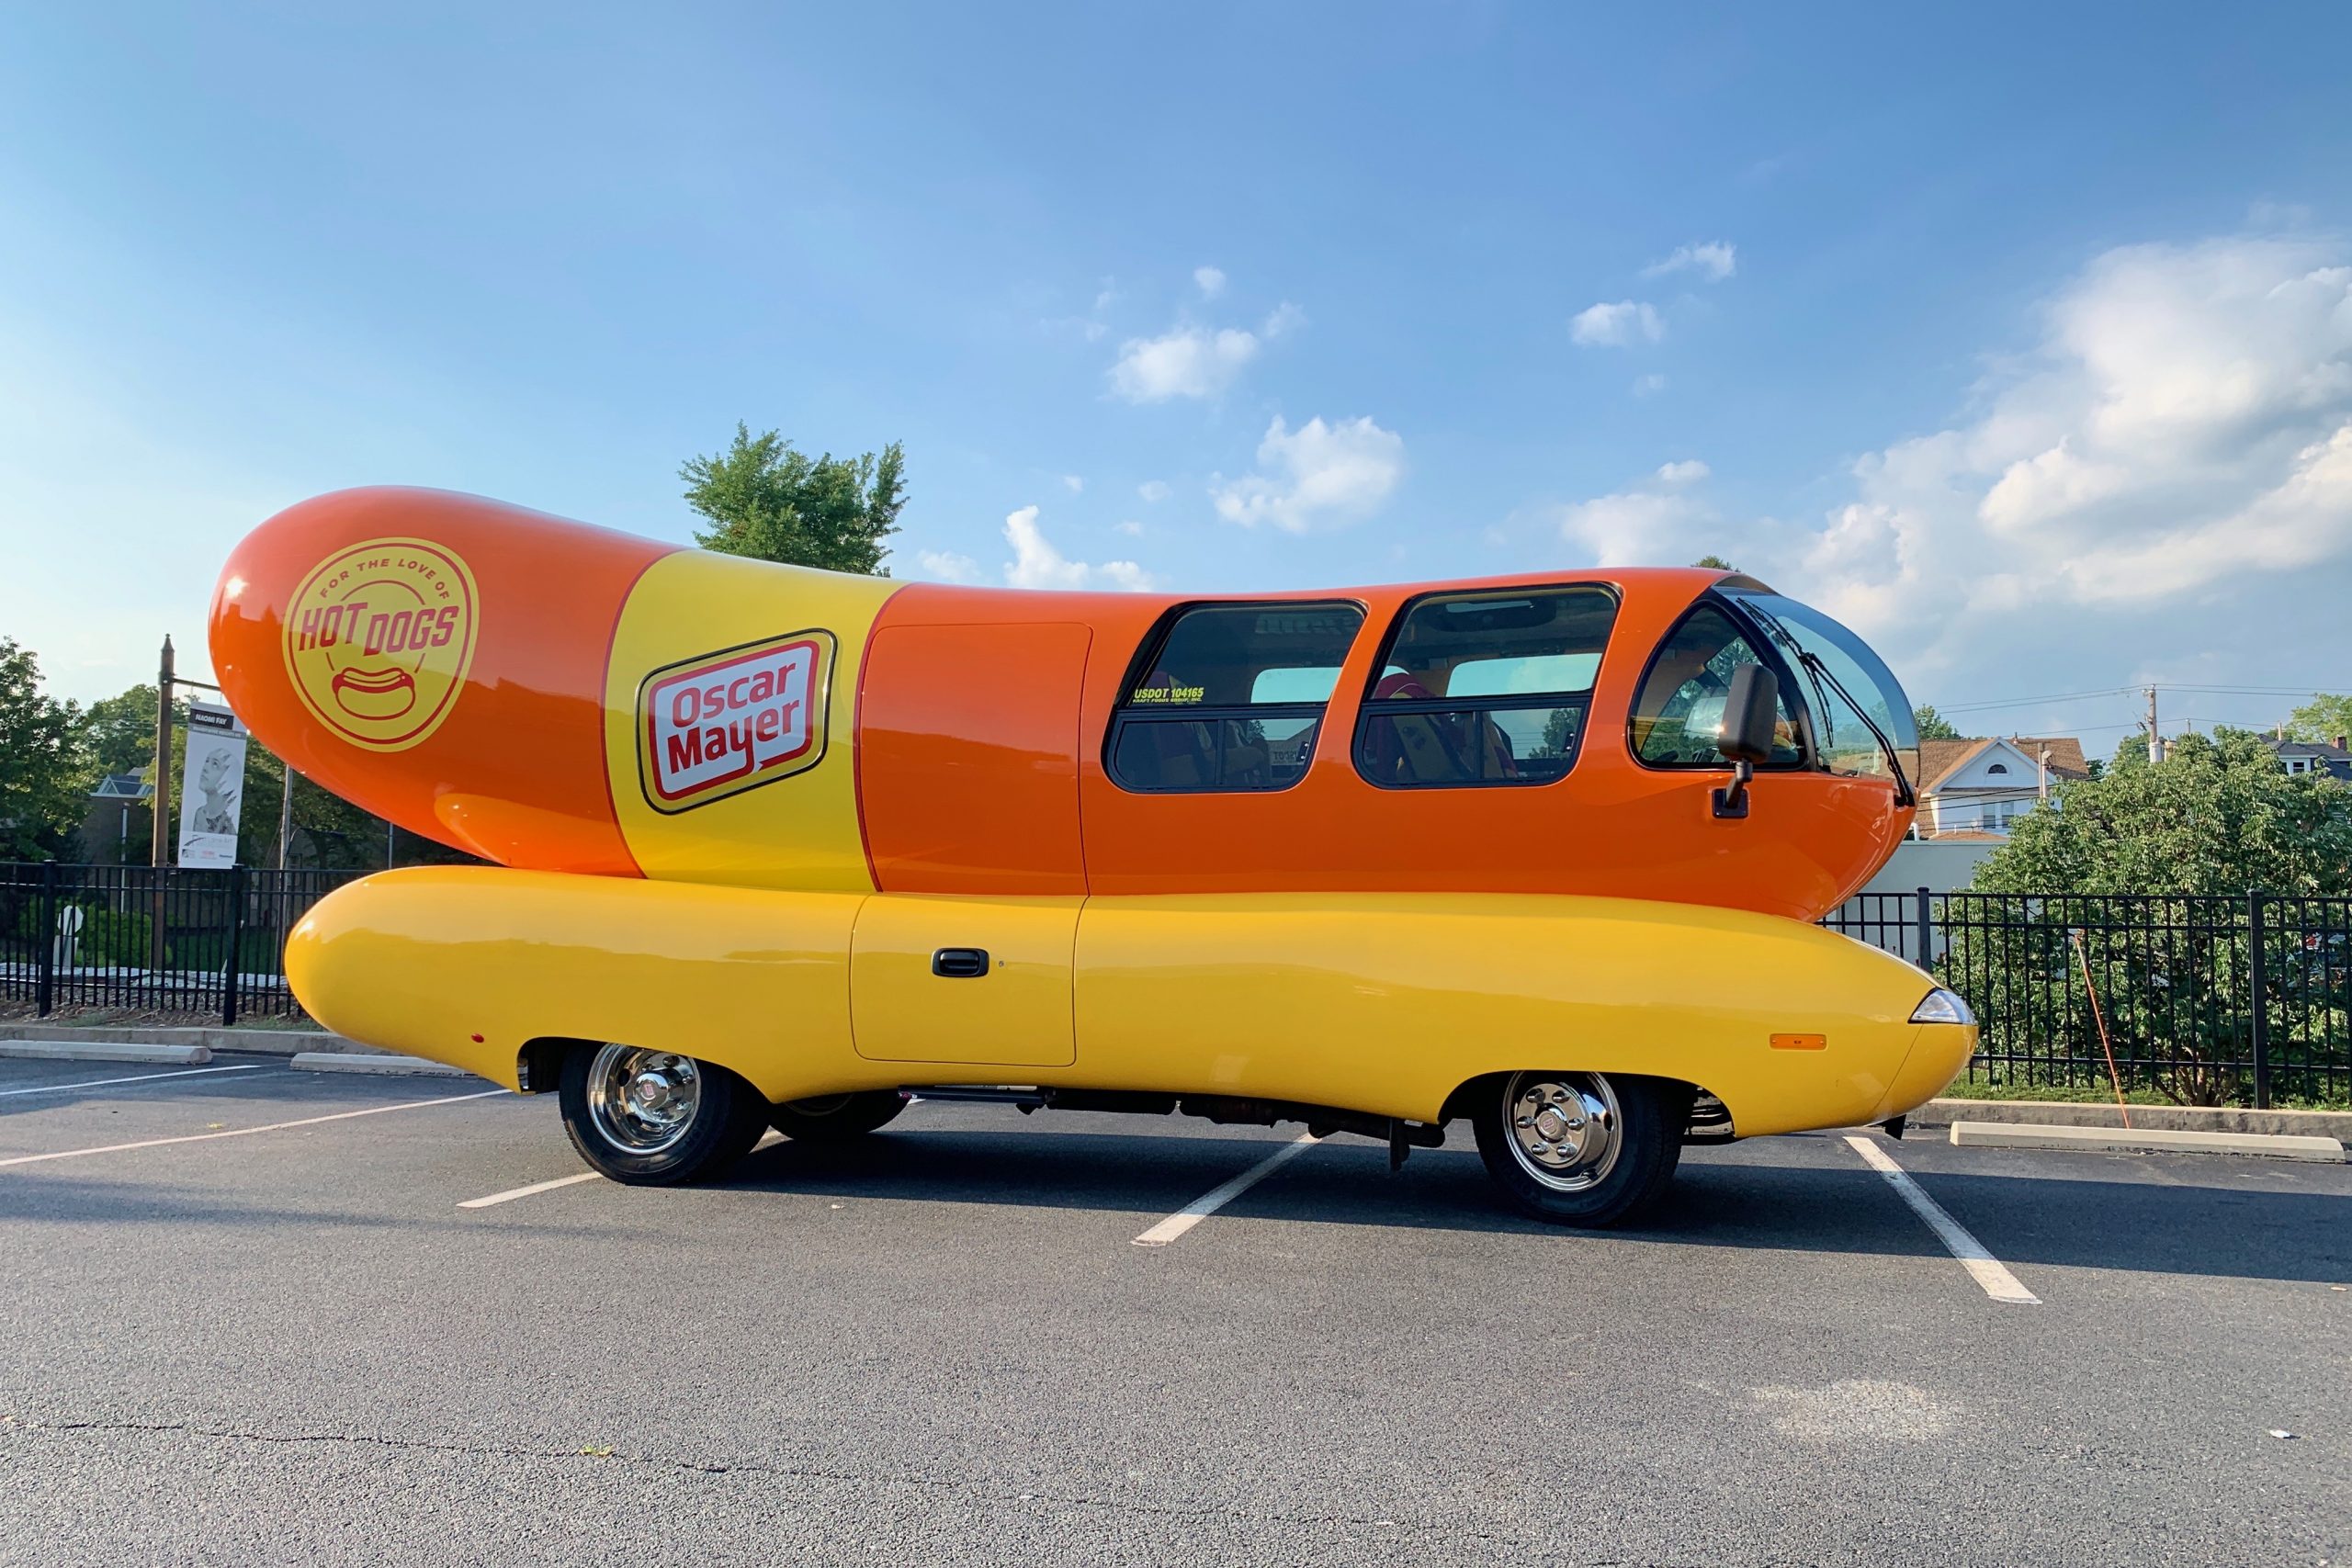 The Oscar Mayer Wienermobile is Coming to Berks County